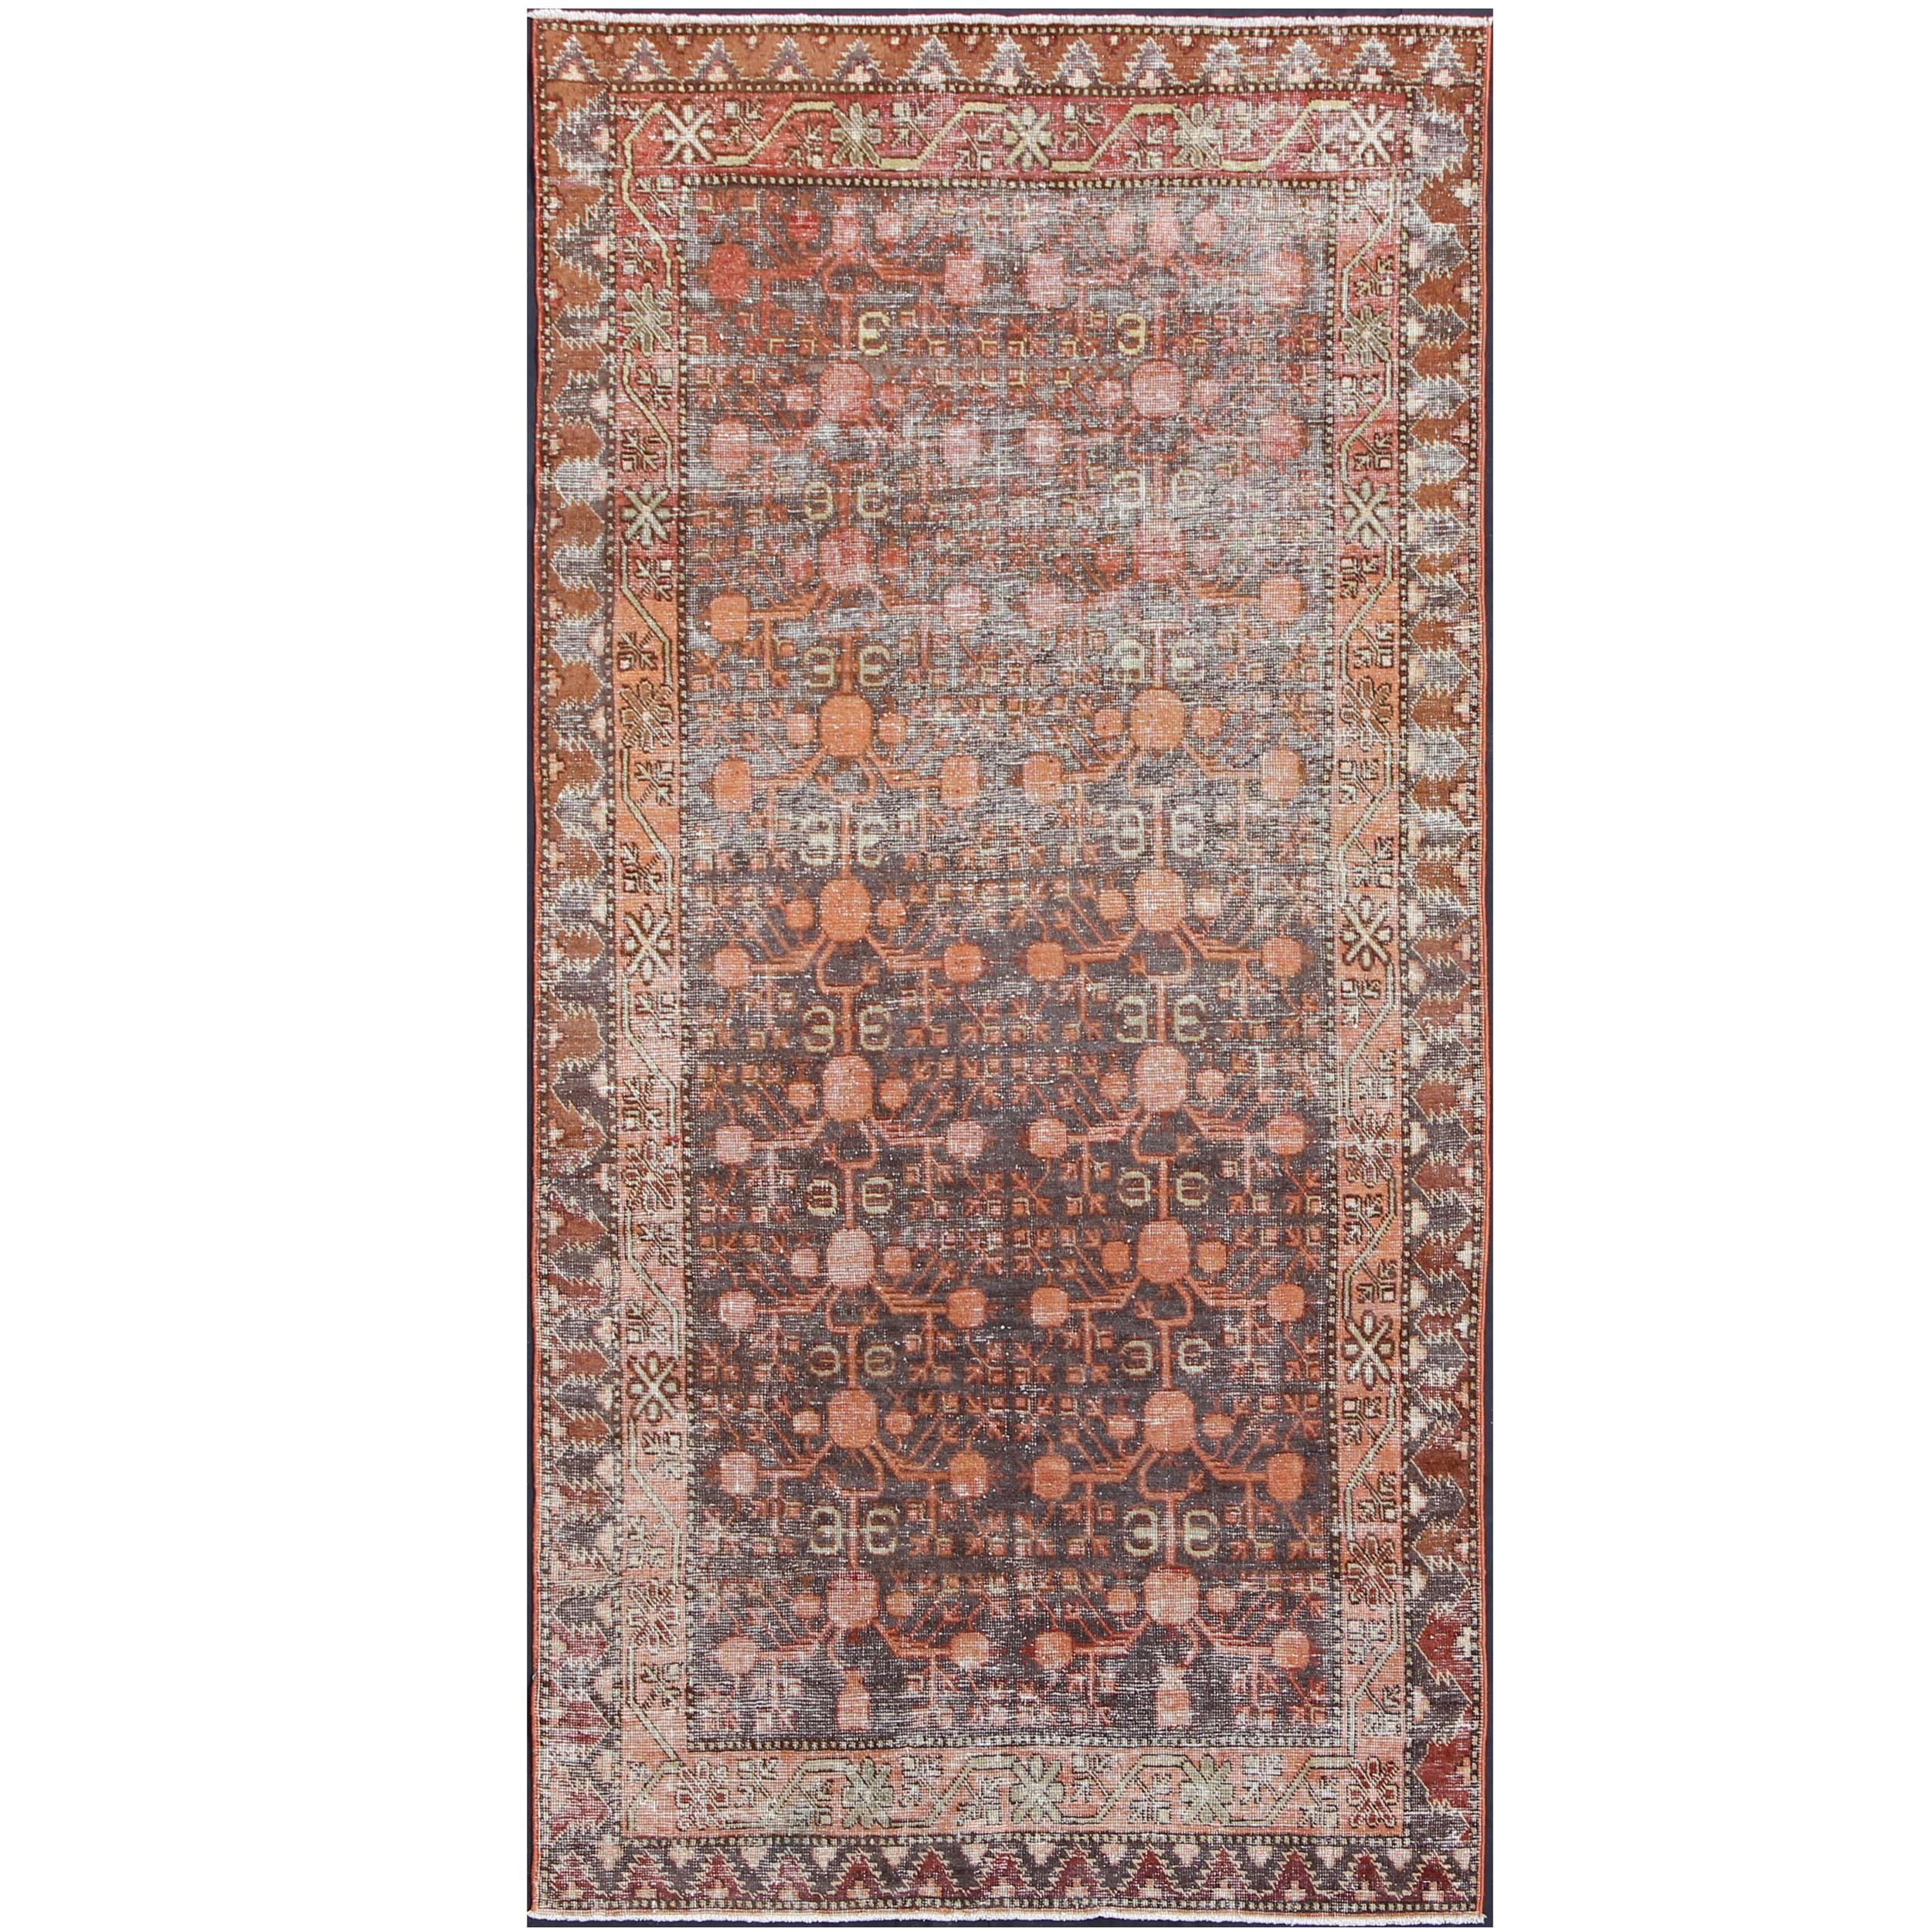 Antique Khotan Carpet in Charcoal, Burnt Red, Salmon and Taupe For Sale